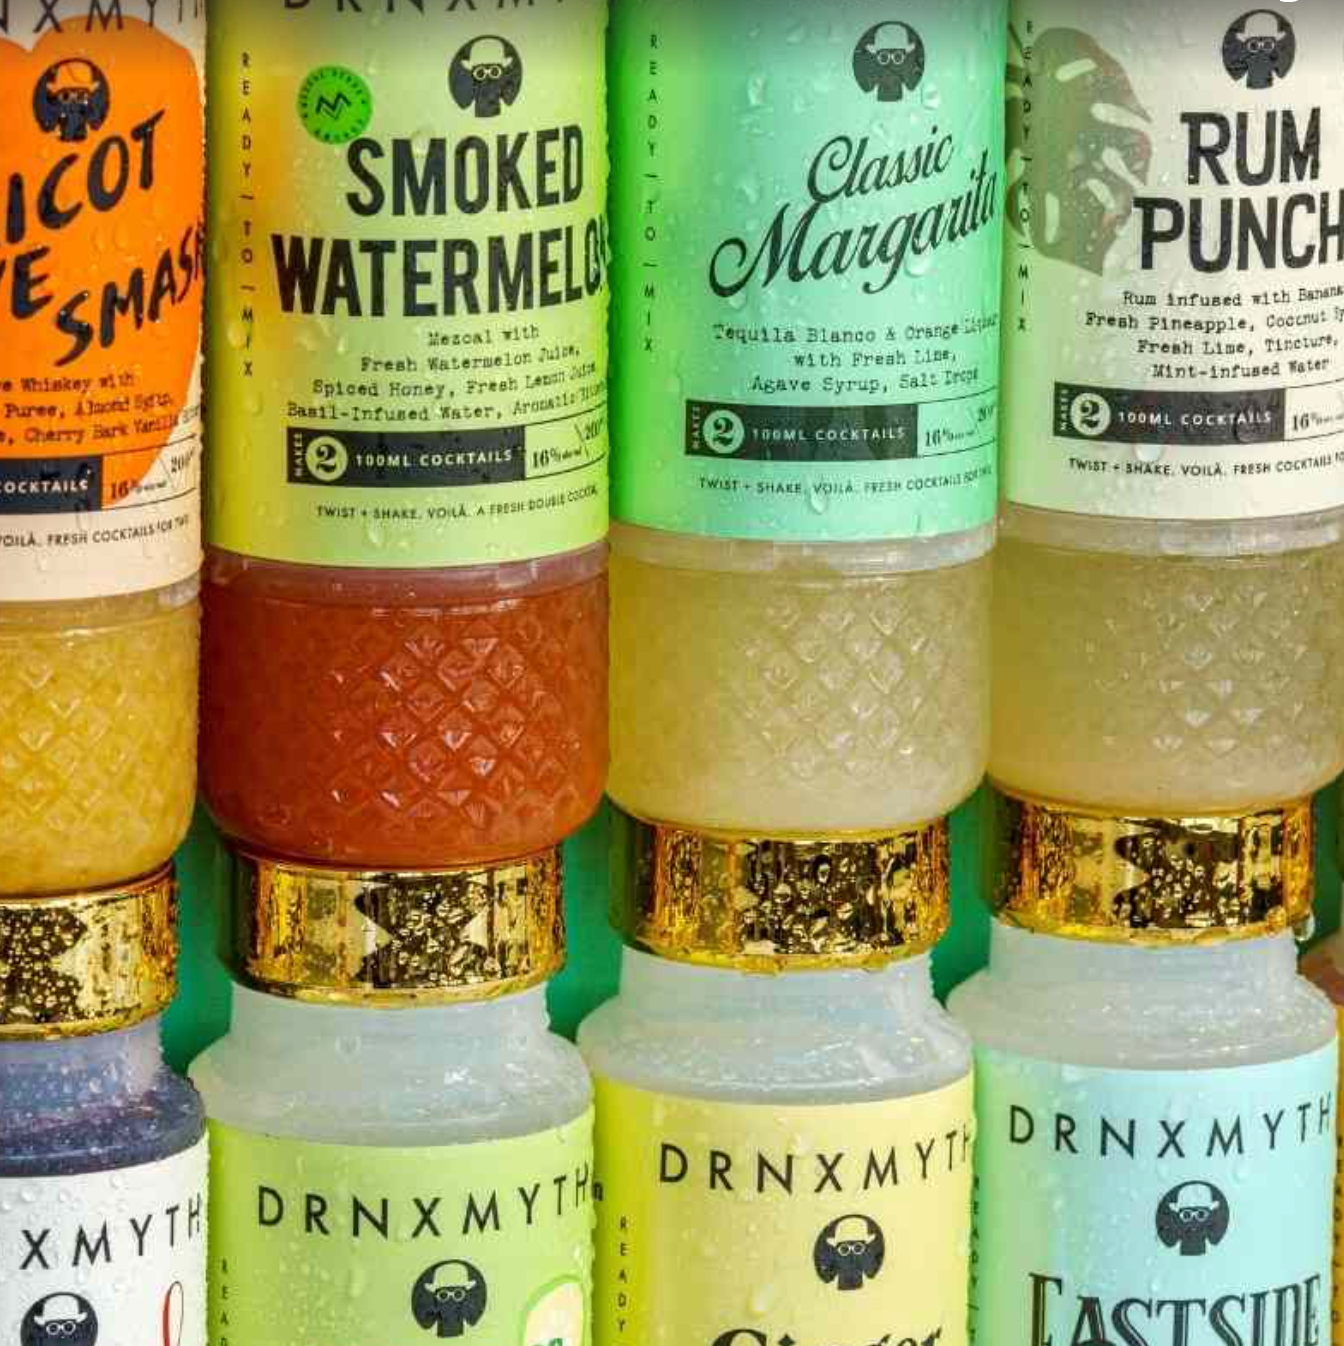 Bottled cocktails from Drnxmyth like rum punch